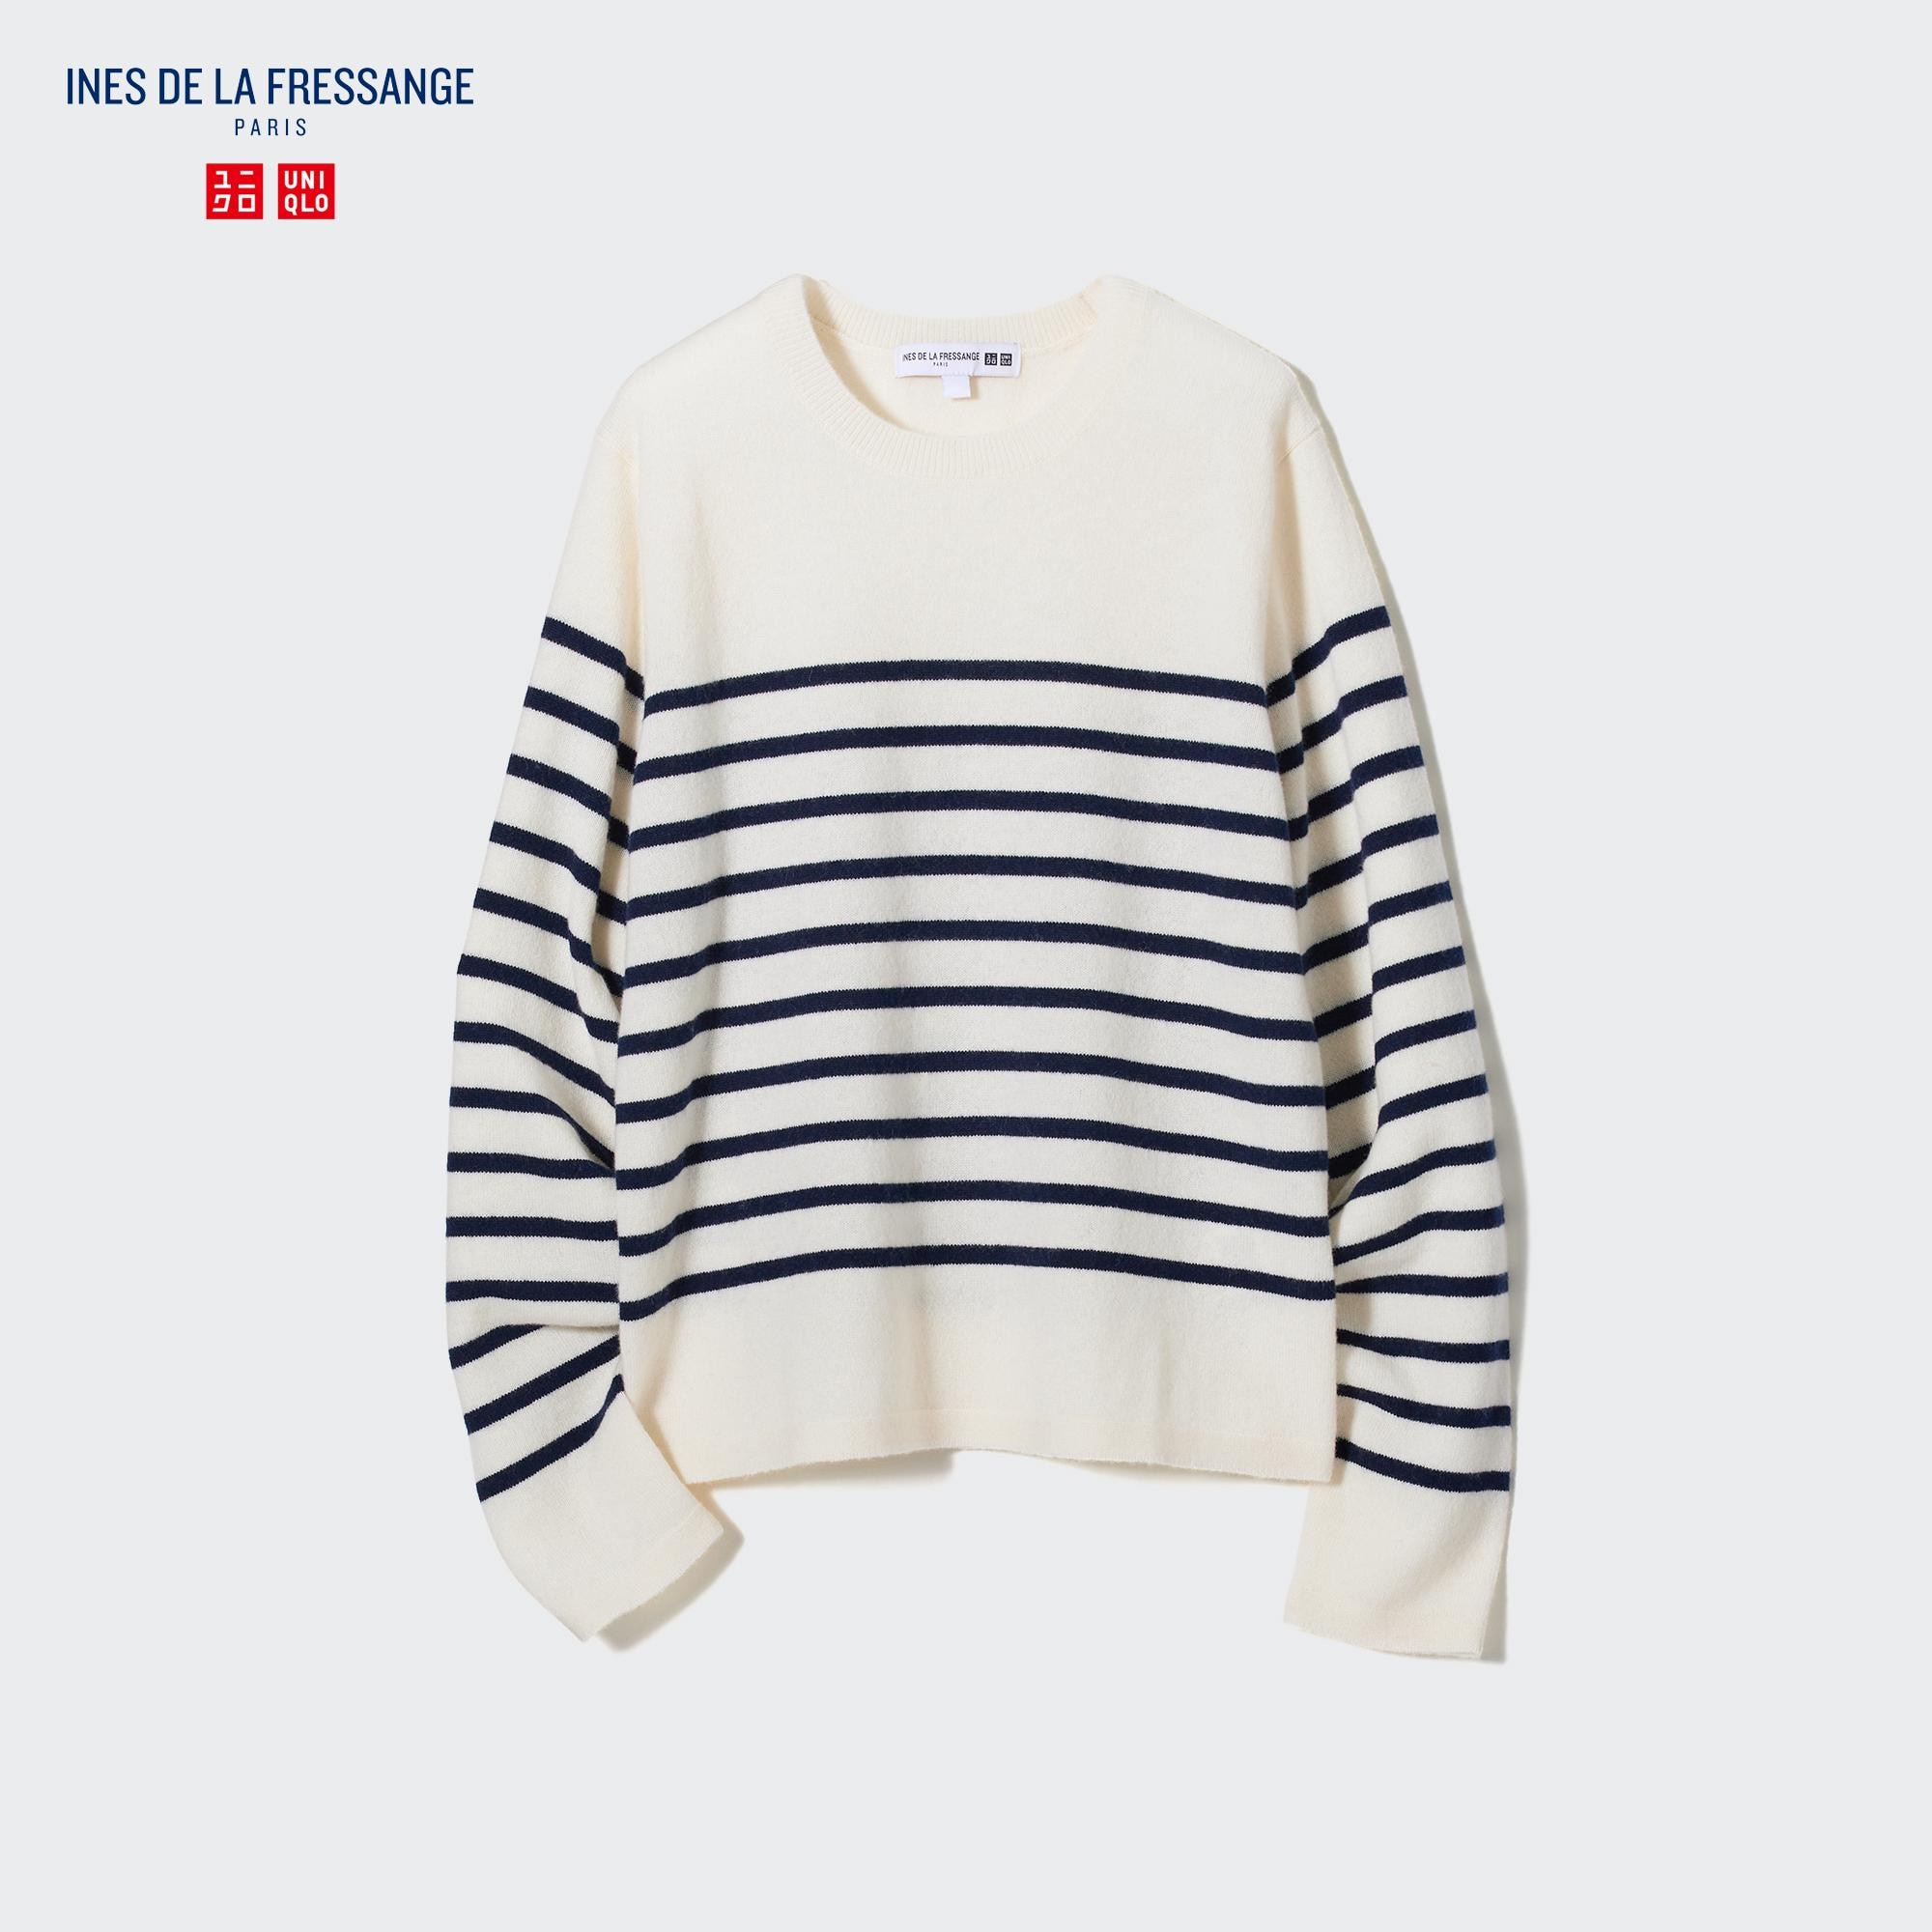 Smooth Cotton Relaxed Crew Neck Sweater